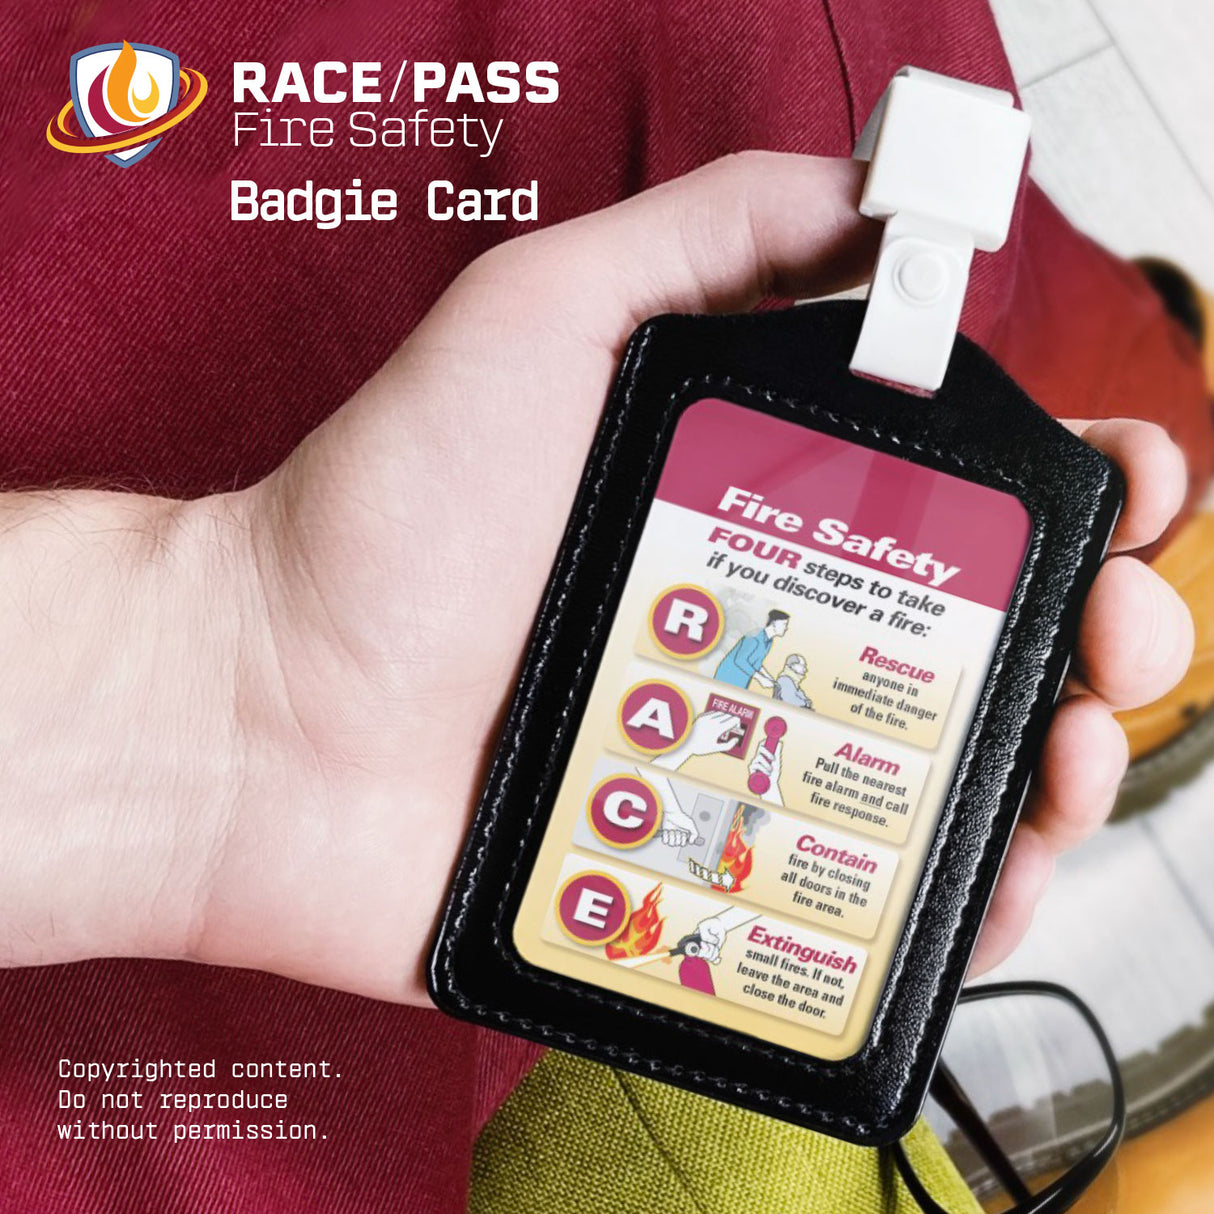 RACE/PASS Fire Safety Badgie Card shown in a black leather badge holder. Our RACE/PASS Fire Safety Badgie Card gives your staff an instant reference of what to do in case of a fire.